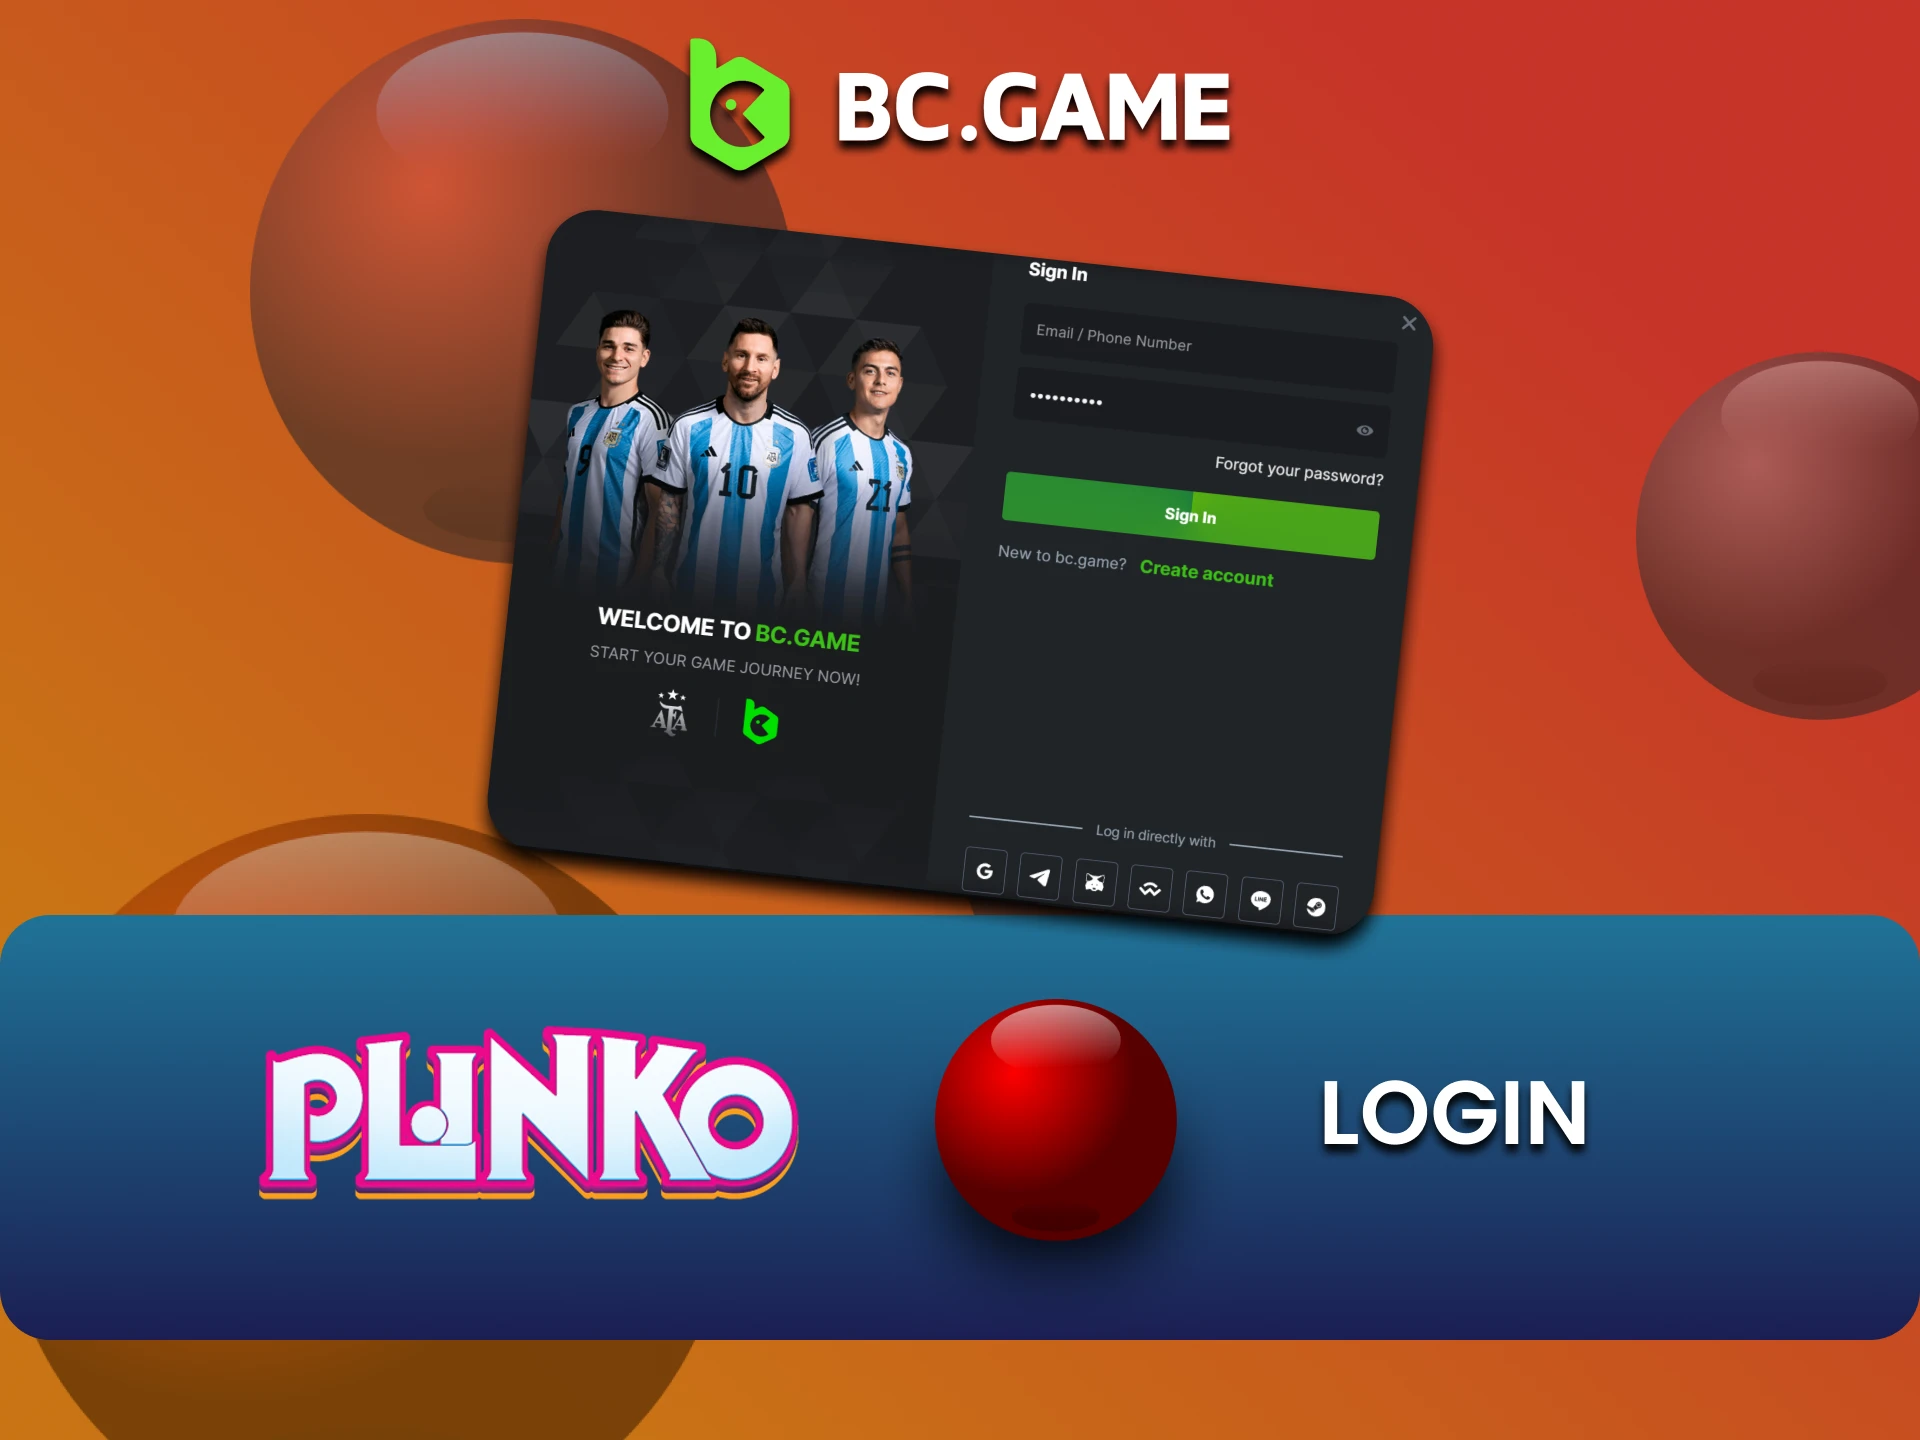 Log in to your existing BCGame account to play Plinko.